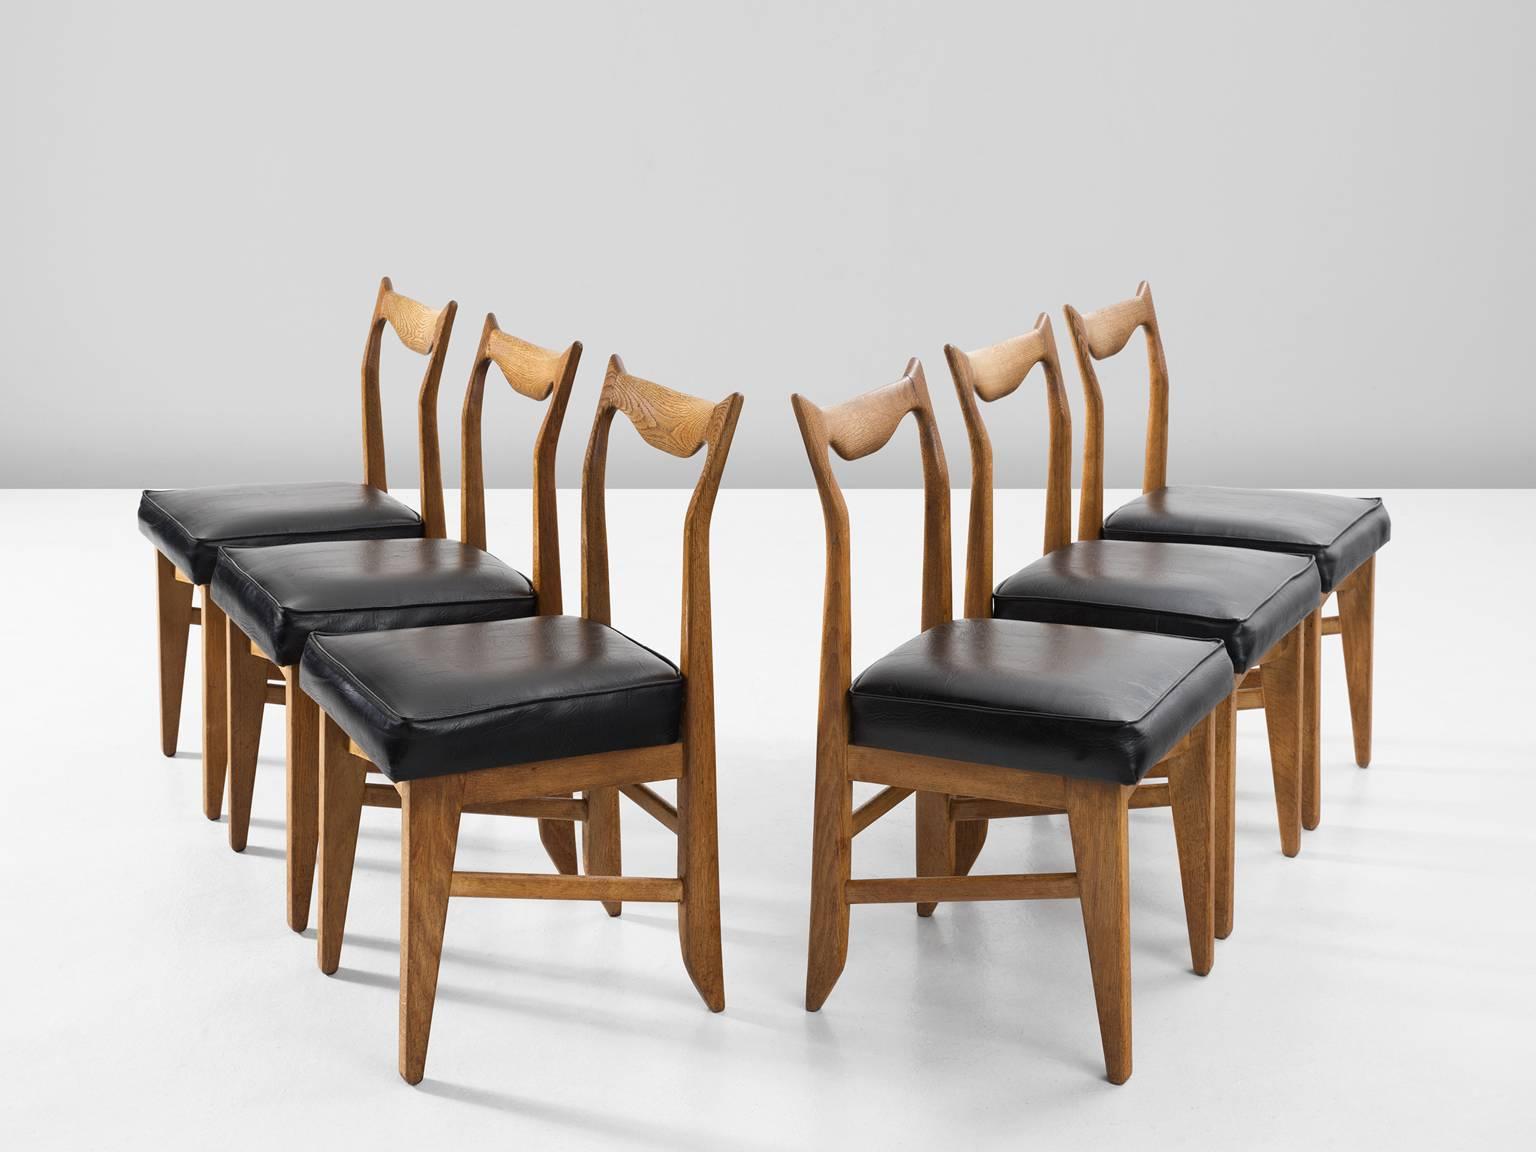 Set of six dining chairs 'Marie Claire', in oak and faux-leather, by Guillerme et Chambron, France, 1960.

Set of six solid oak dining chairs by Guillerme and Chambron. These chairs show the characteristic frame of this French designer duo.